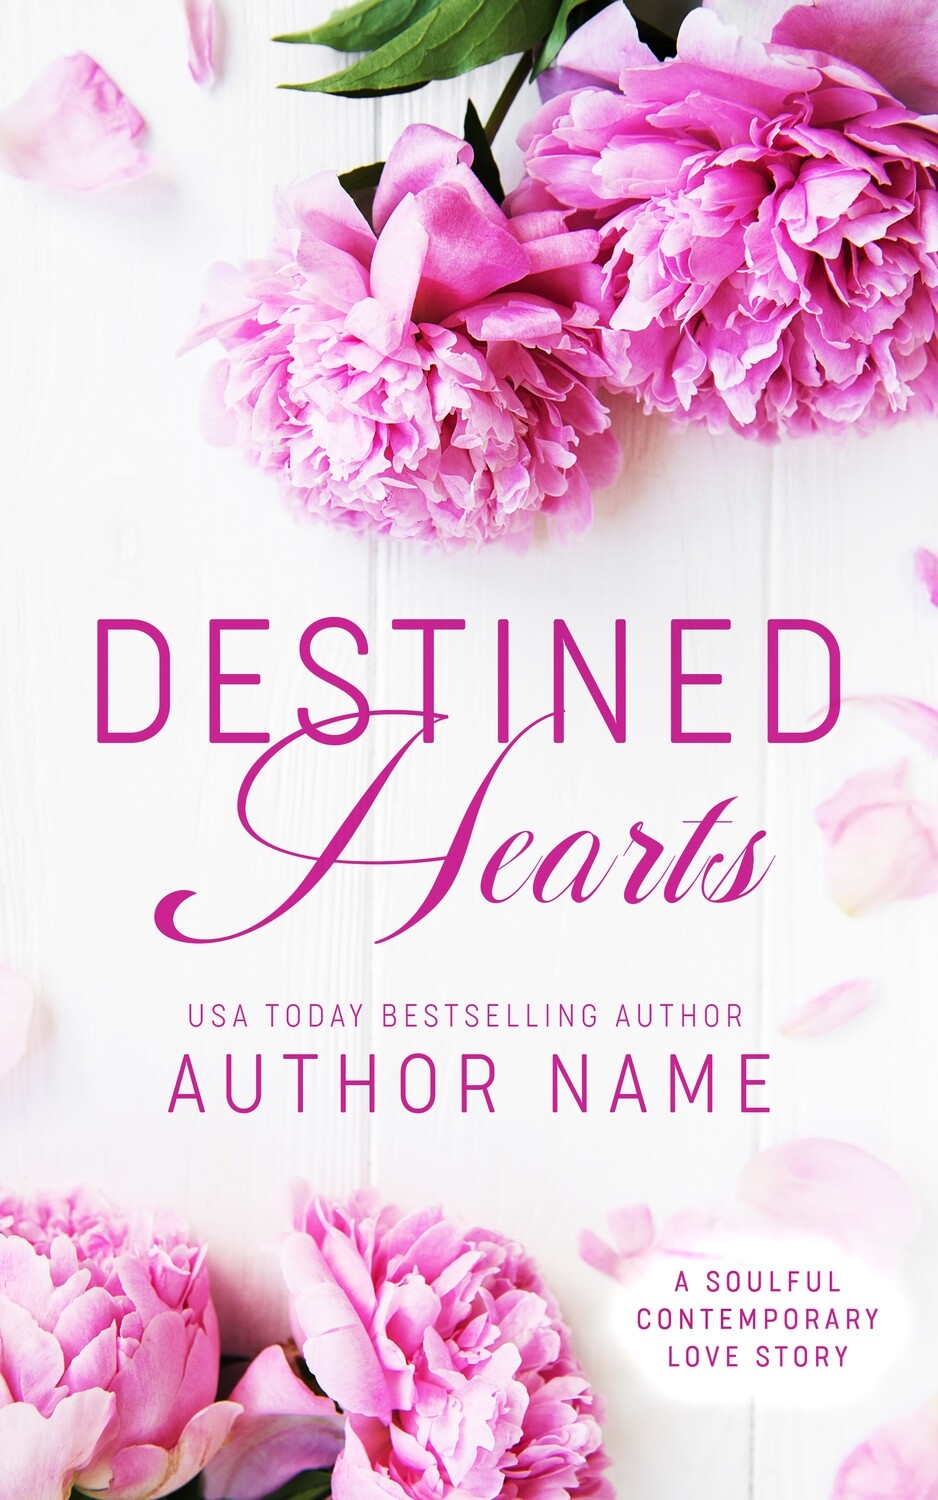 DESTINED HEARTS